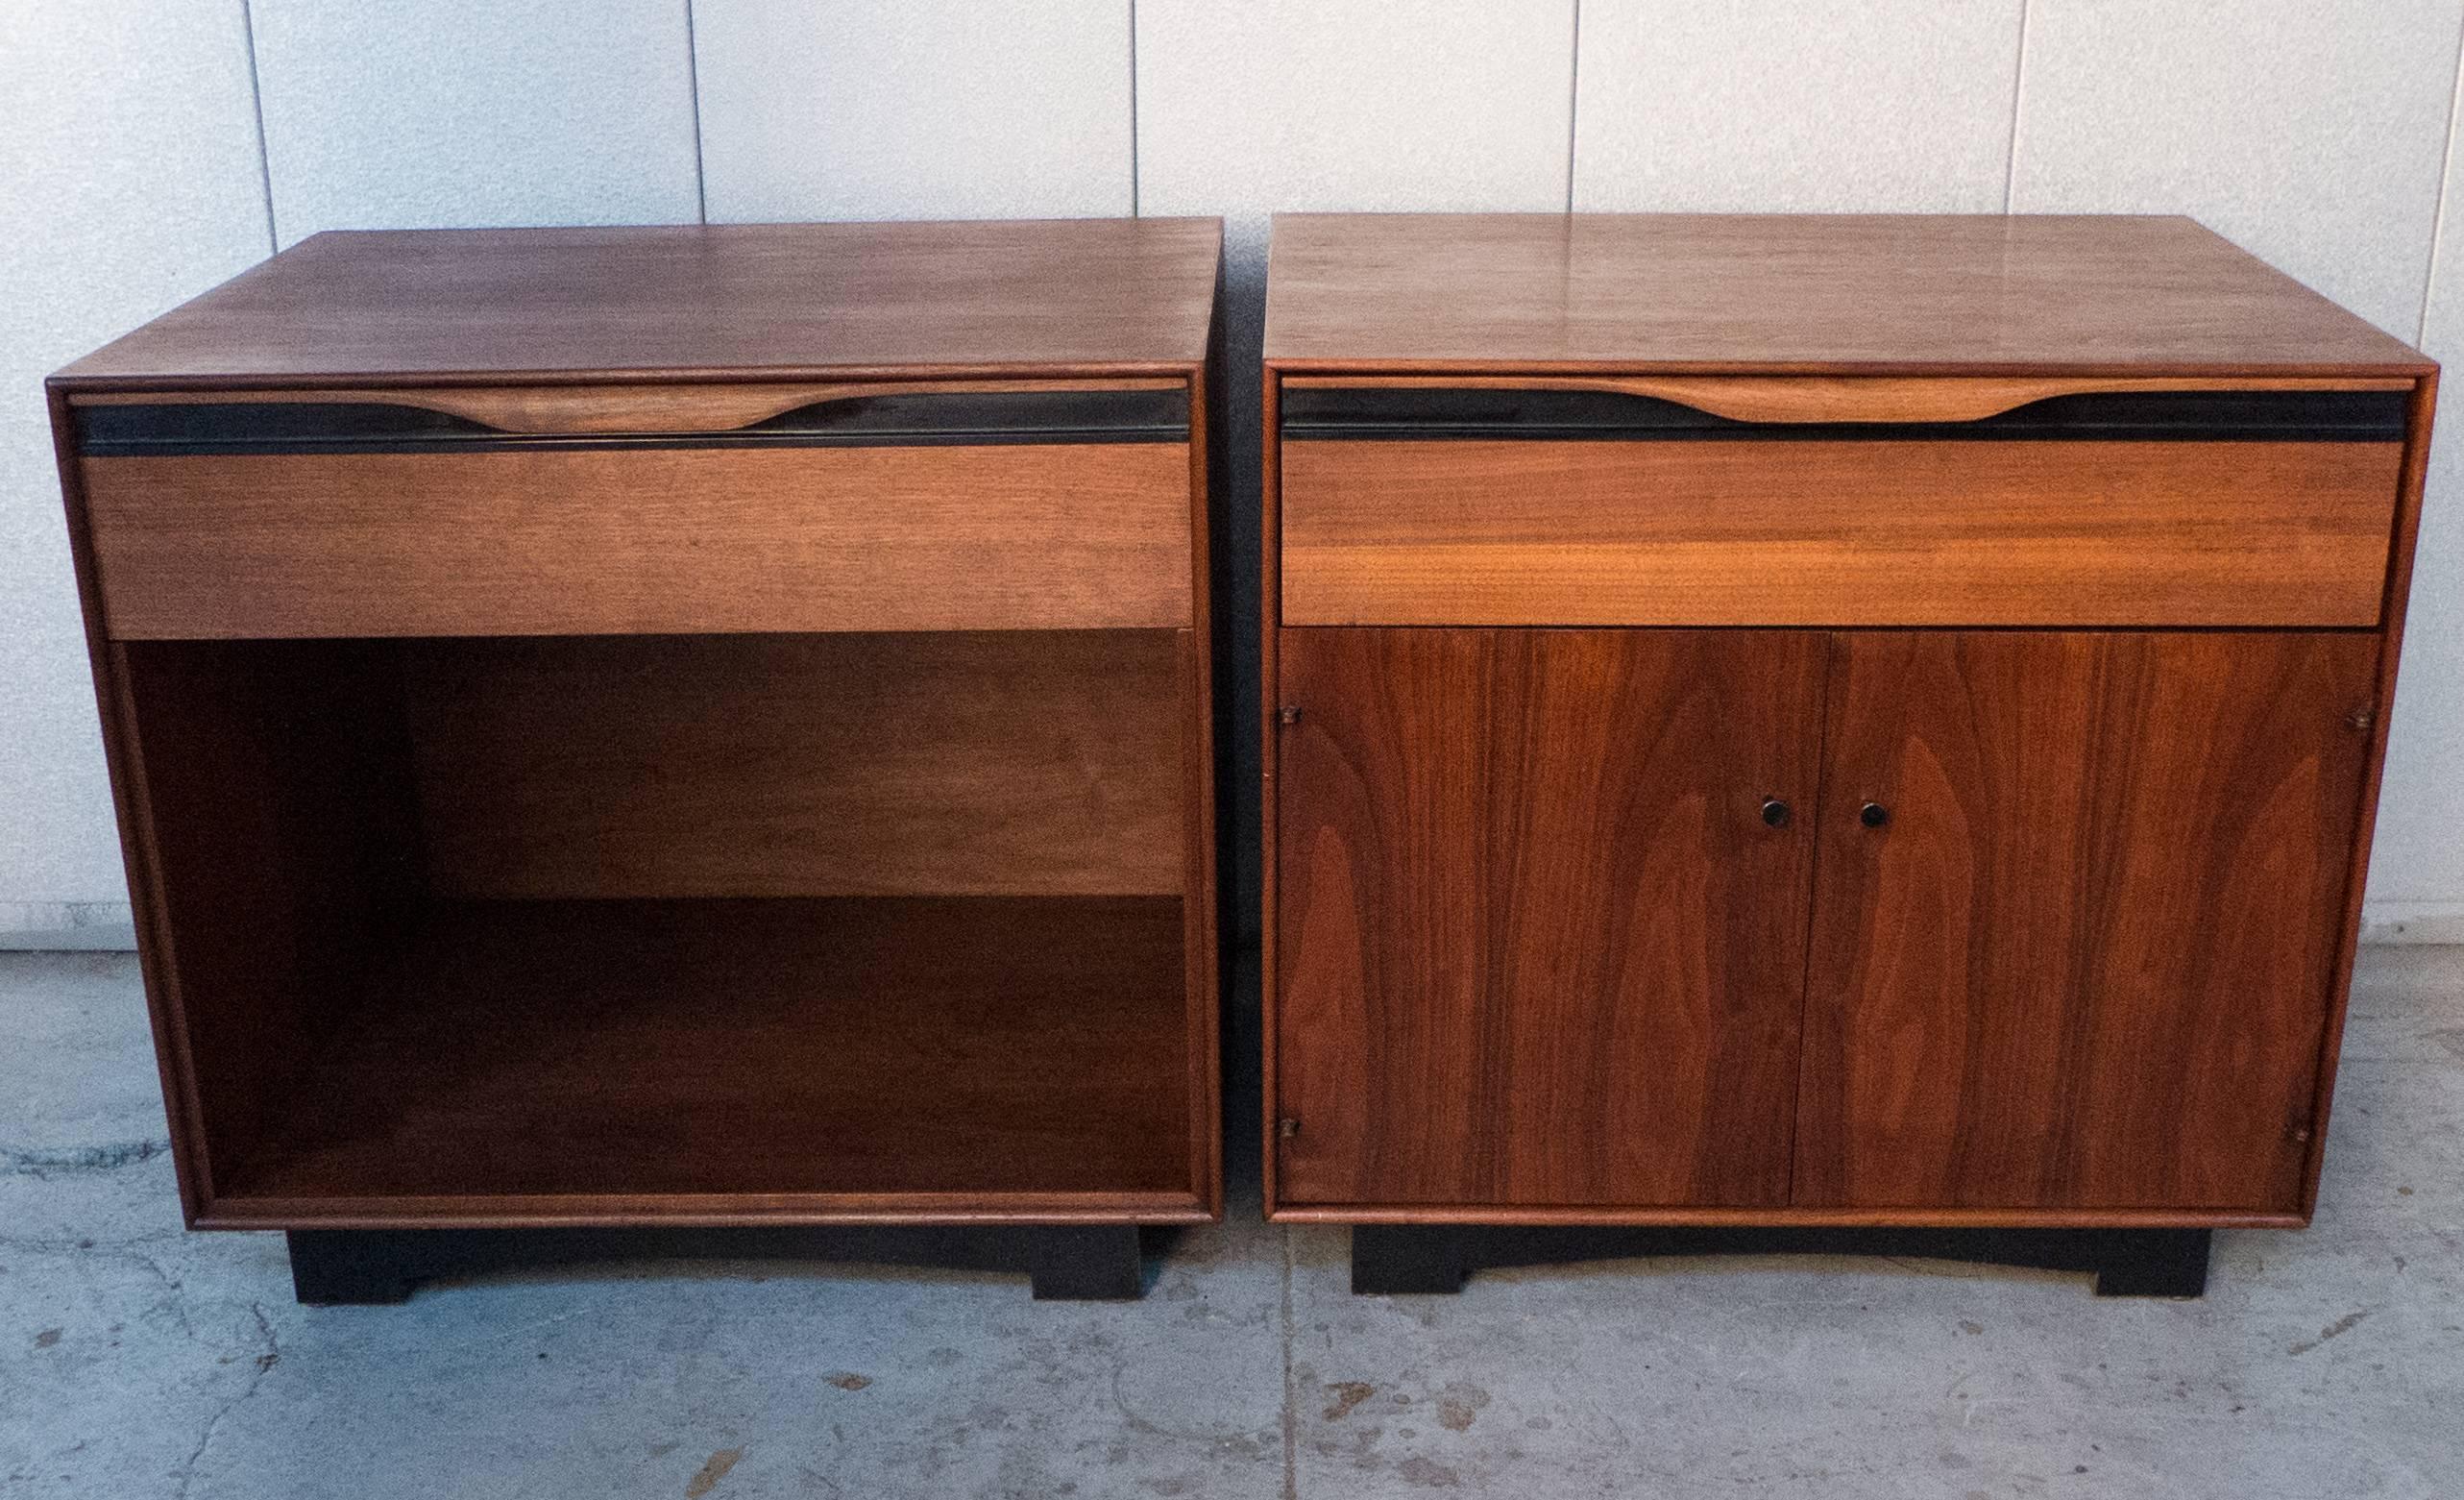 Handsome pair of nightstands in walnut and ebonized wood; one with a drawer with carved scroll pull over an open compartment; the other with a drawer over a pair of doors. Designed by John Kapel for John Stuart, circa 1950s. The differing facade